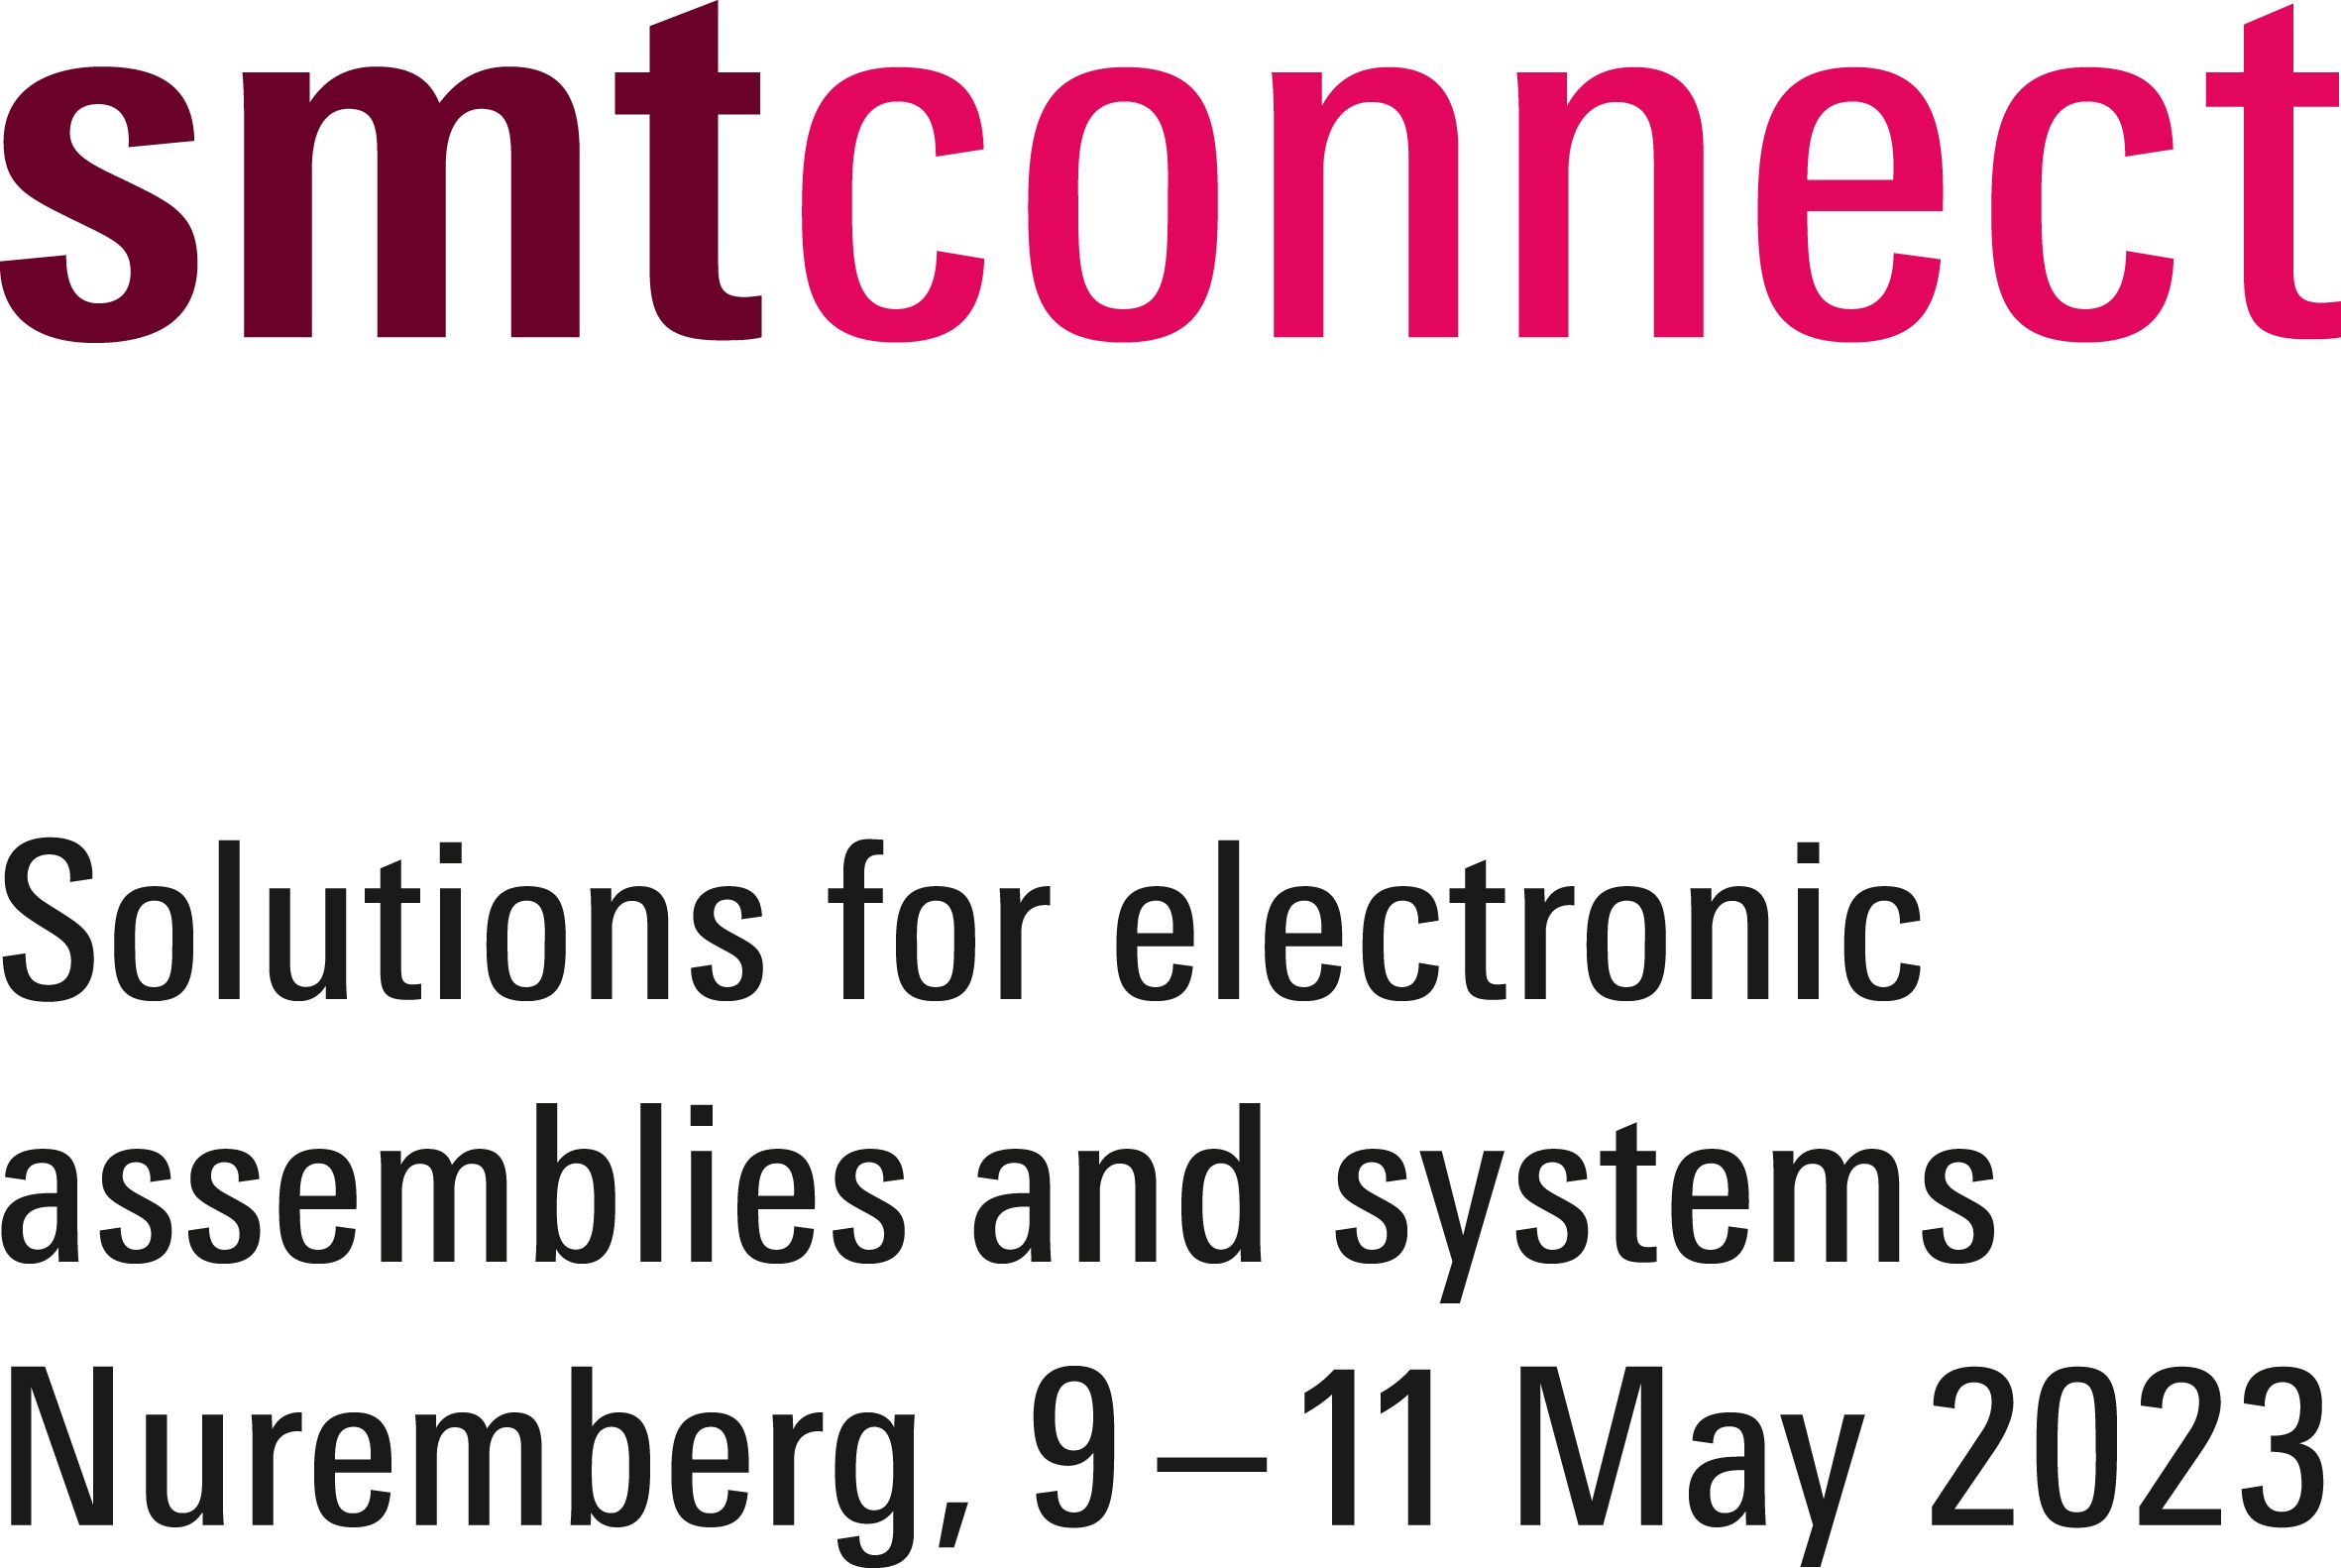 SMTconnect exhibition is on 9-11 May 2023 Nuremberg